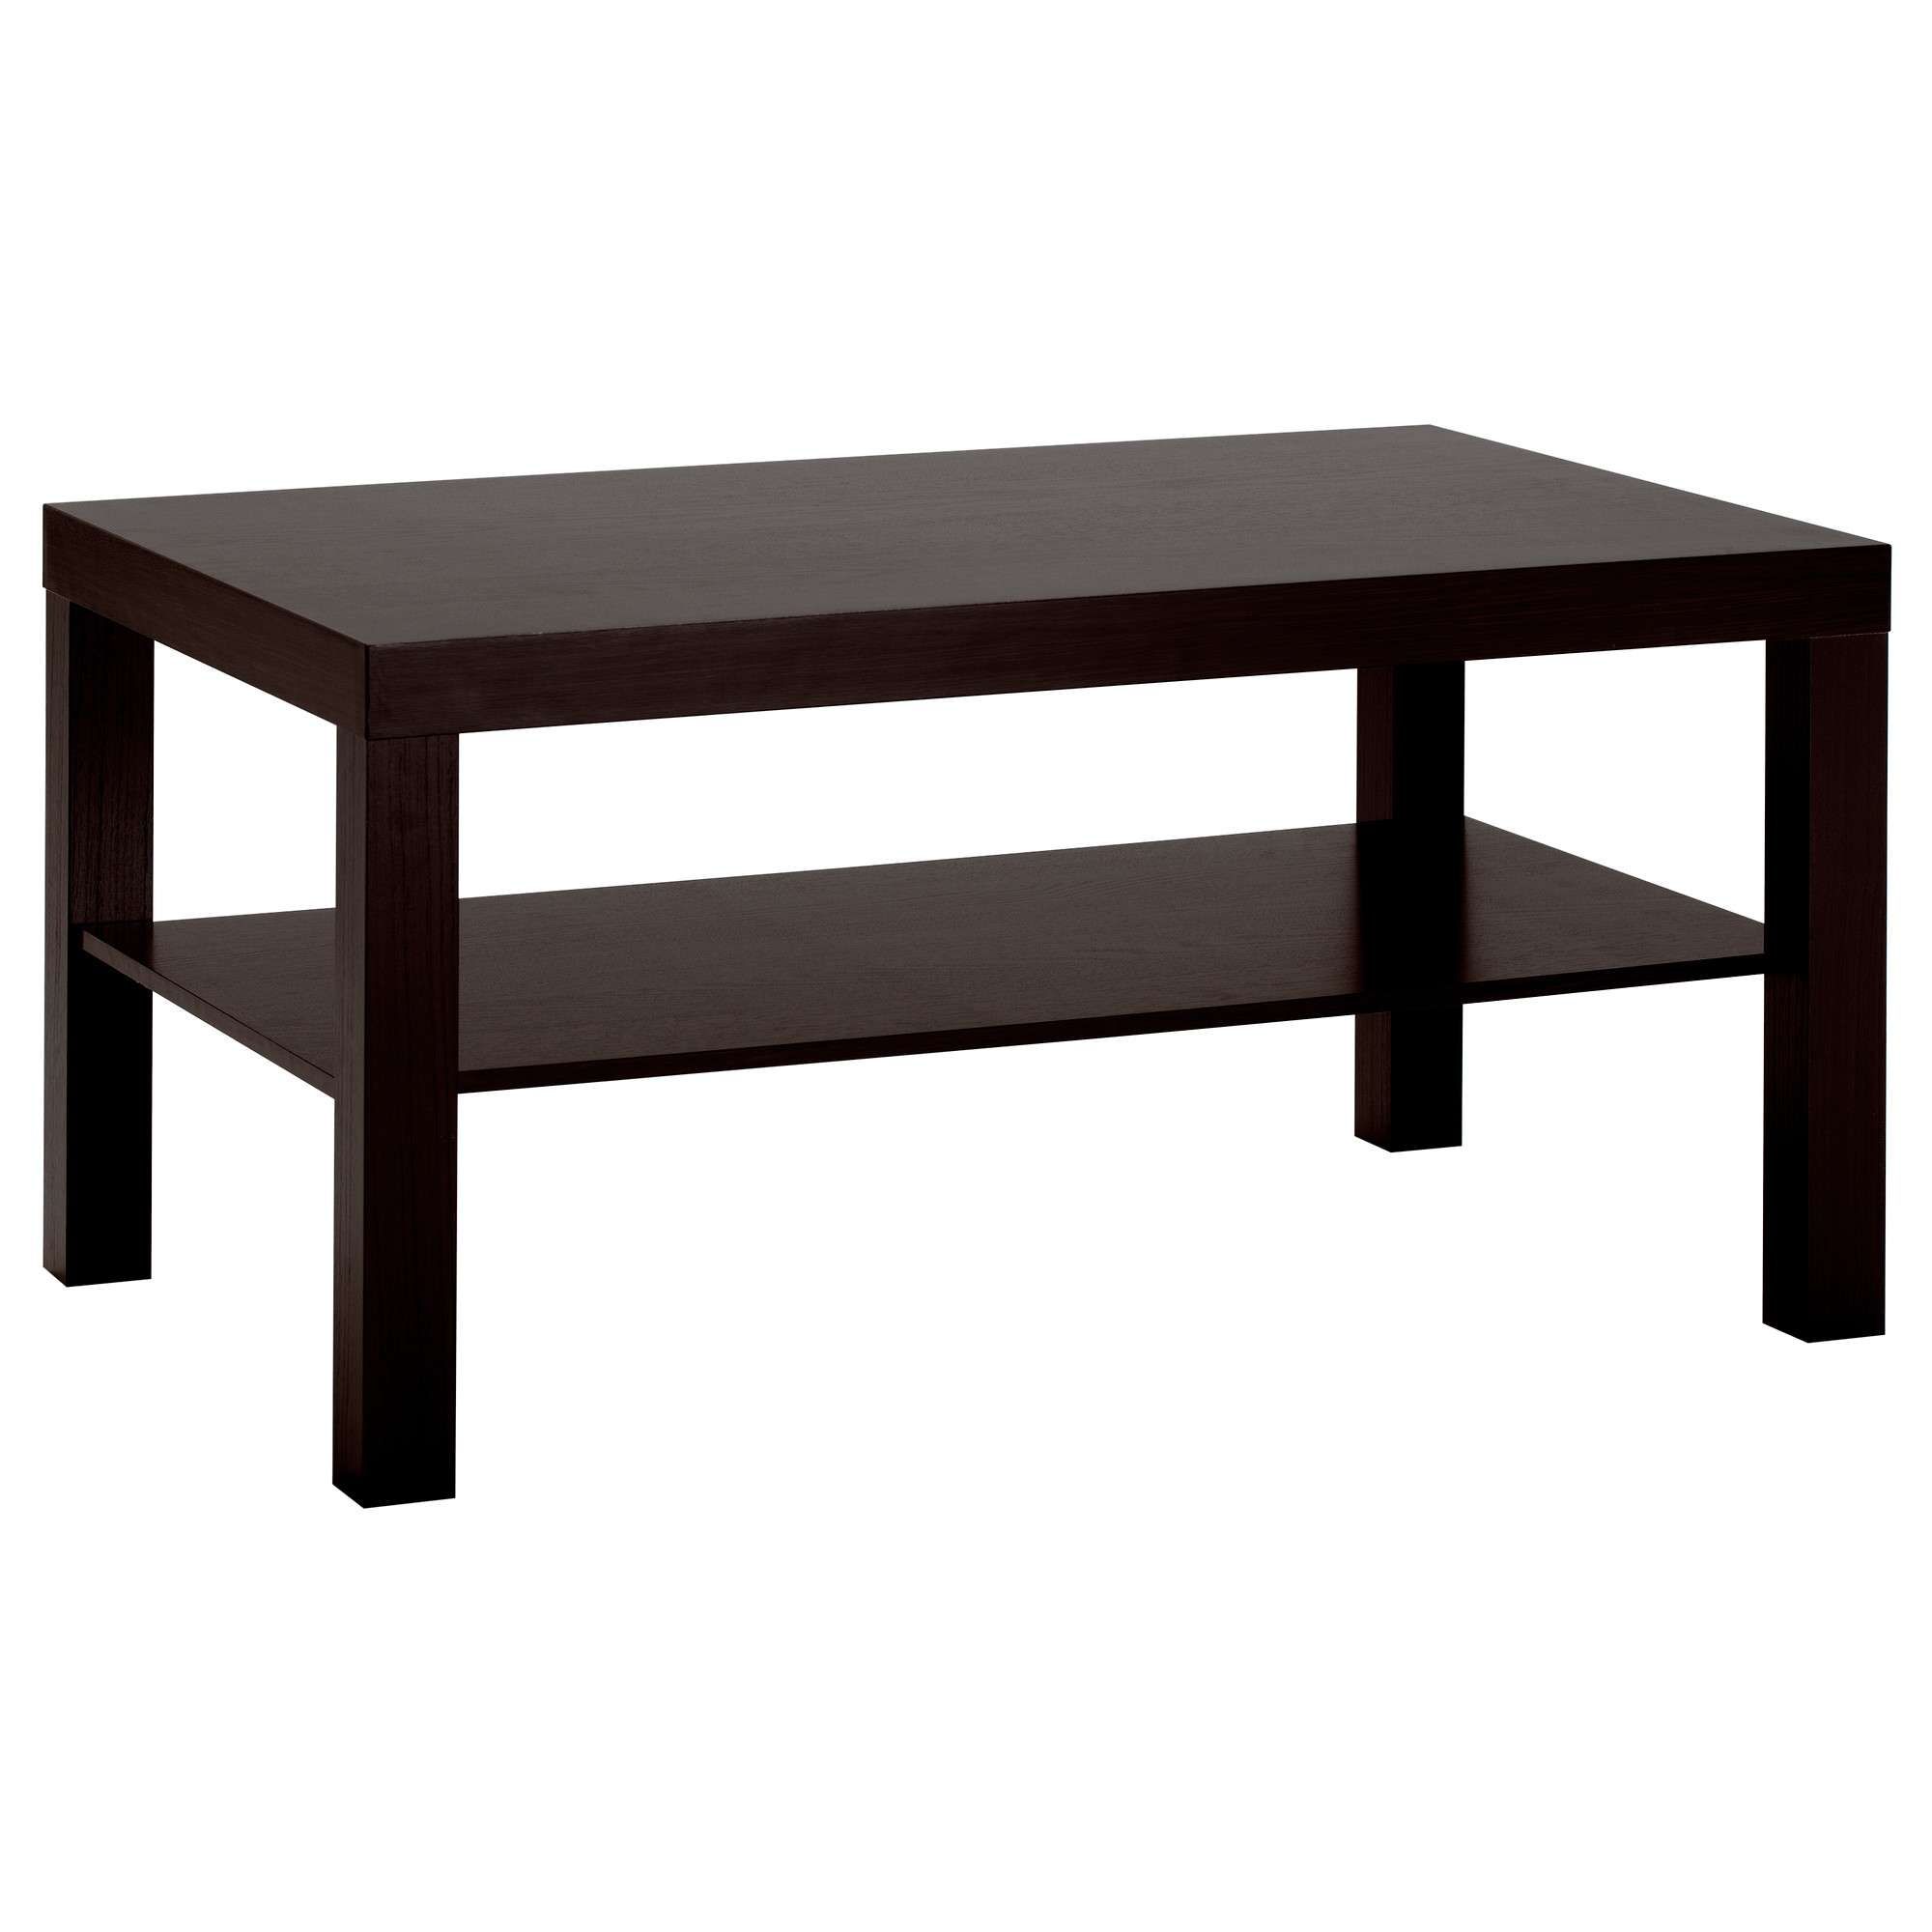 Preferred Cheap Coffee Tables In Coffee Tables & Console Tables – Ikea (View 1 of 20)